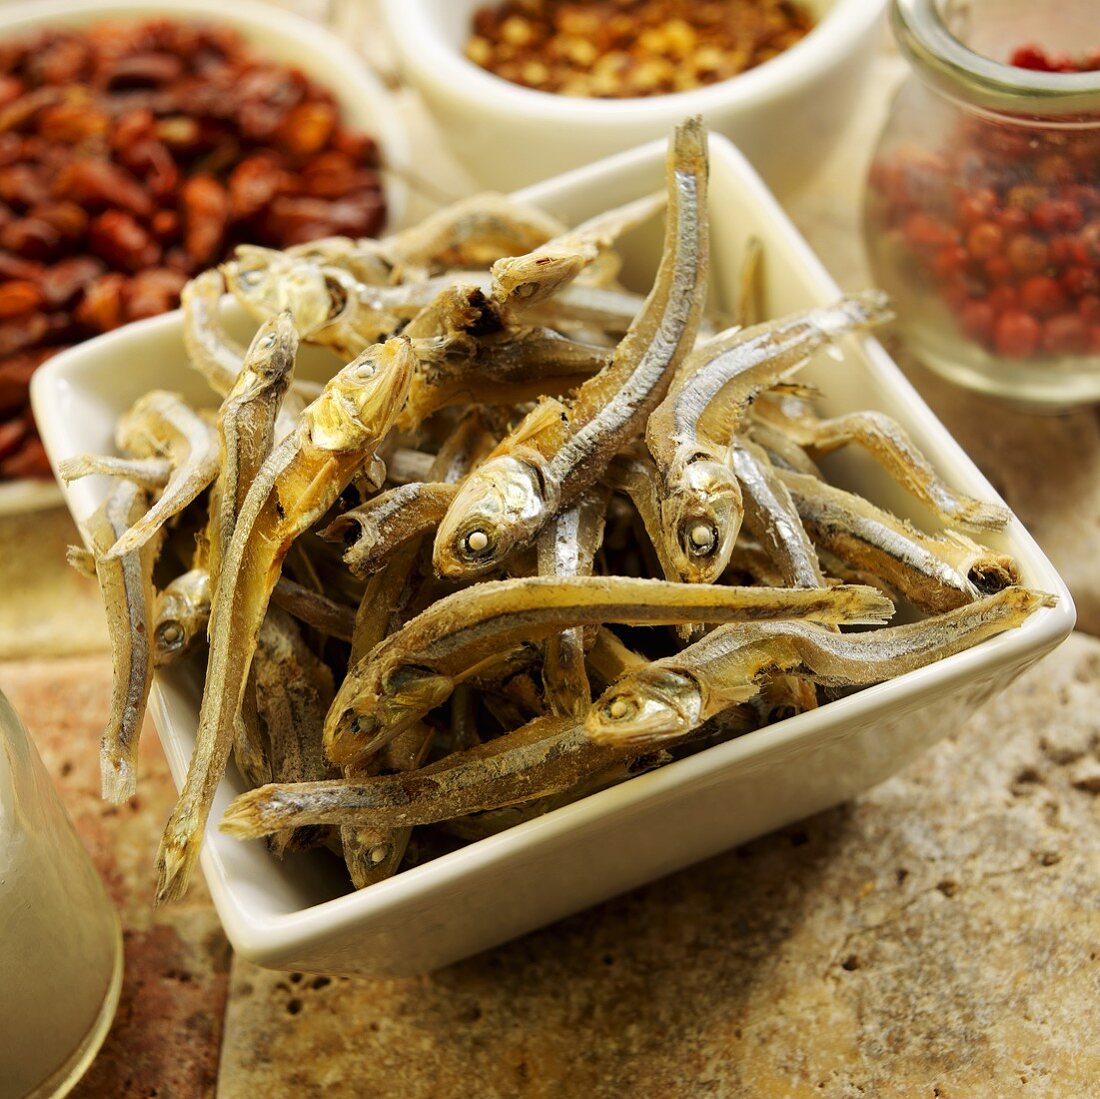 Bowl of Dried Anchovies; Dried Peppers and Peppercorns